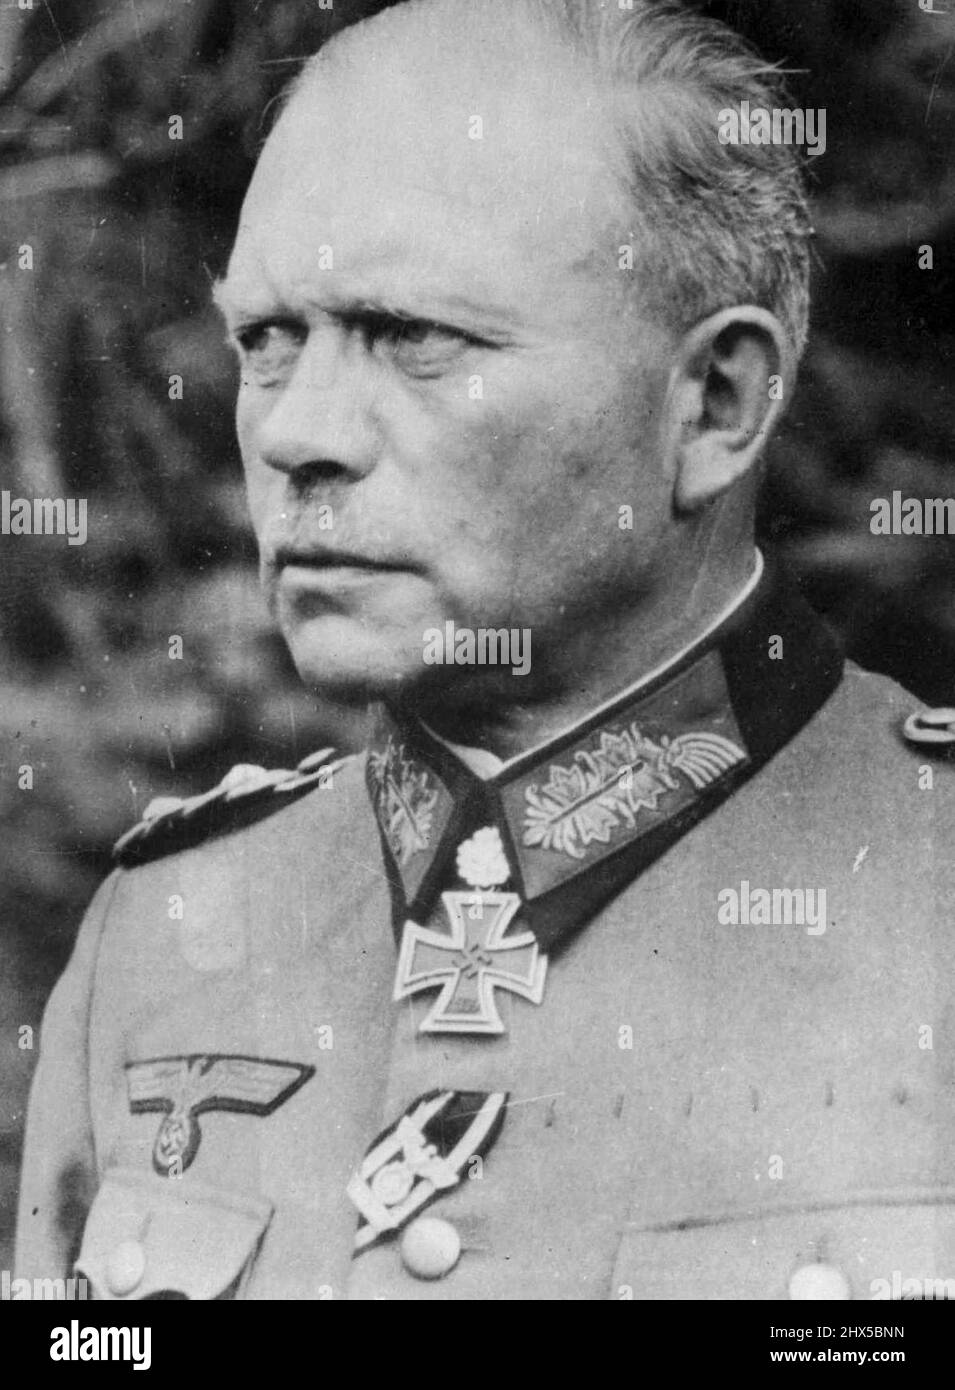 German Army Commanders: Creator Of The Nazi Tank Weapon. Col-General Heinz Guderian, the creator of Germany's tank weapon, and the leader of the Nazi panzer divisions in three campaigns. He has been decorated by Hitler with the Knight's cross of the Iron cross in recognition of his services. May 15, 1924. (Photo by Associated Press Photo). Stock Photo